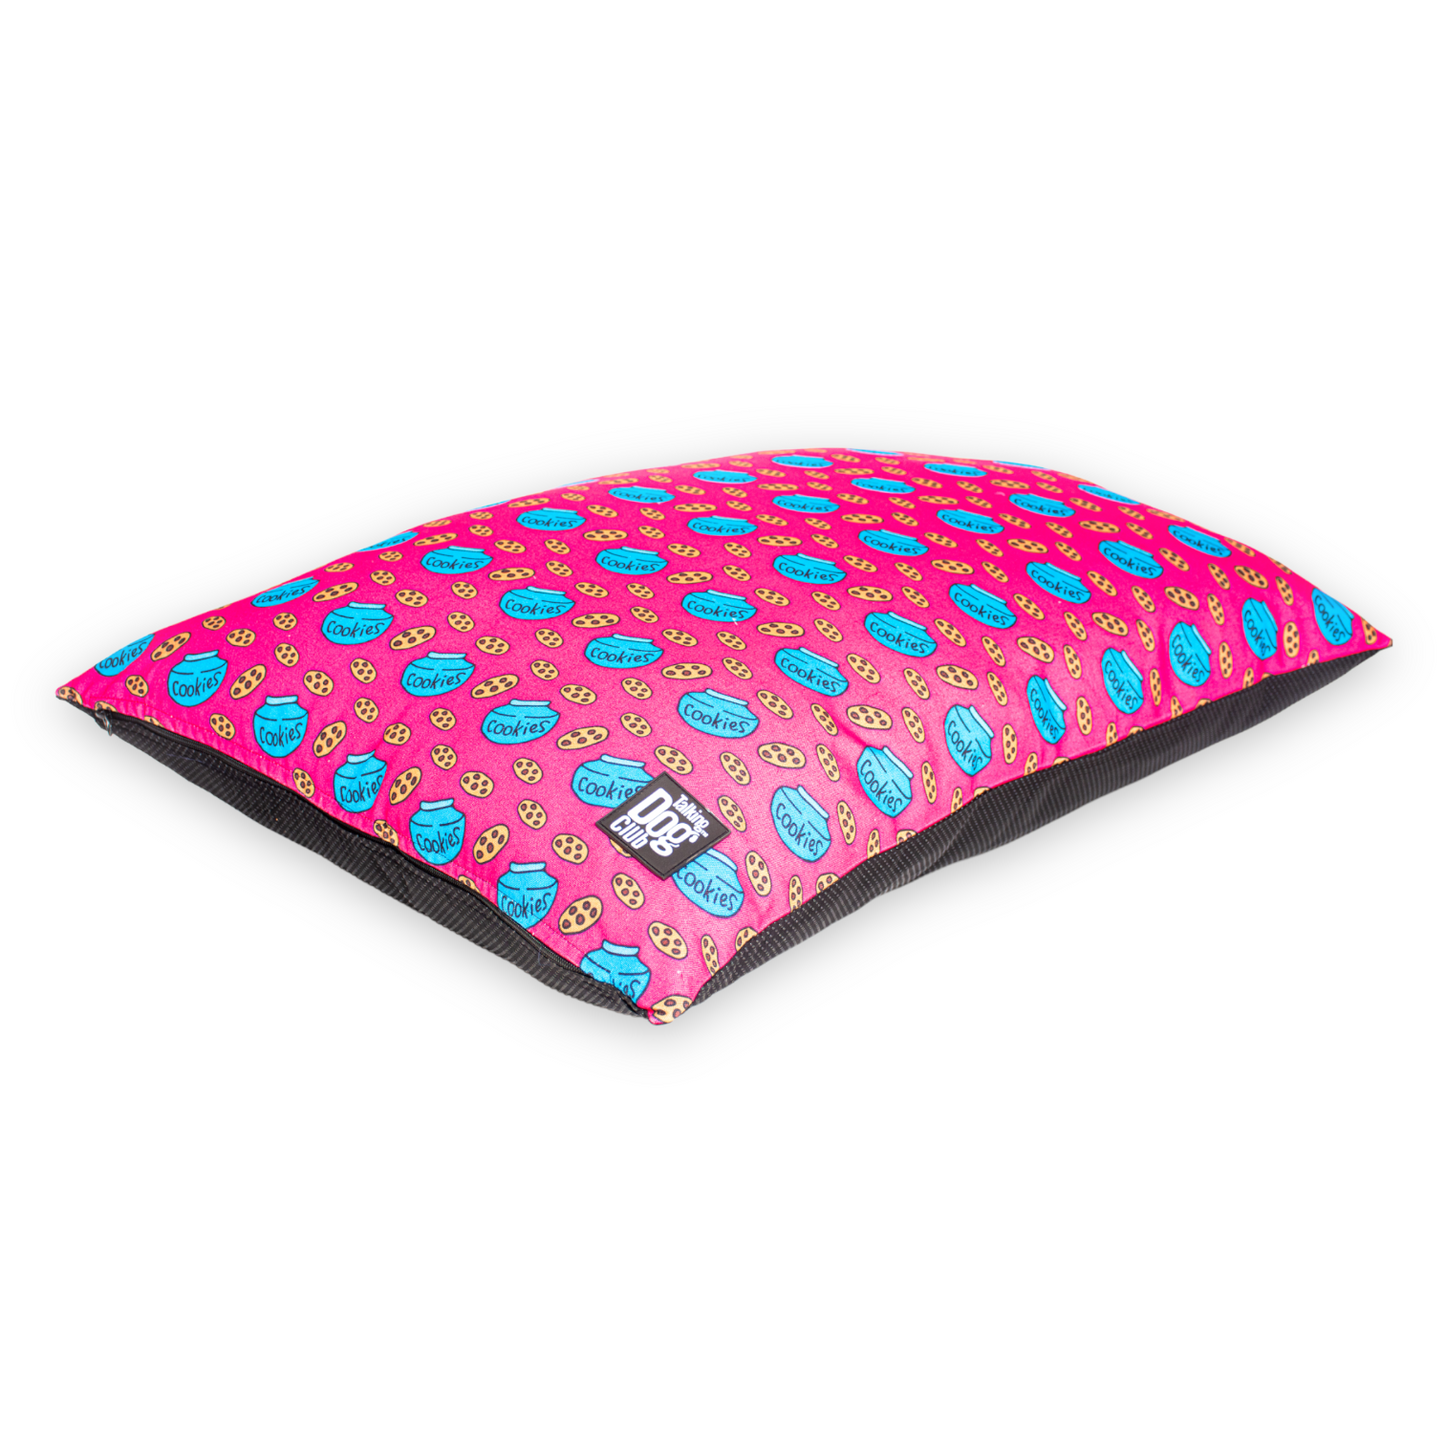 Cookie Dreams Pillow Bed